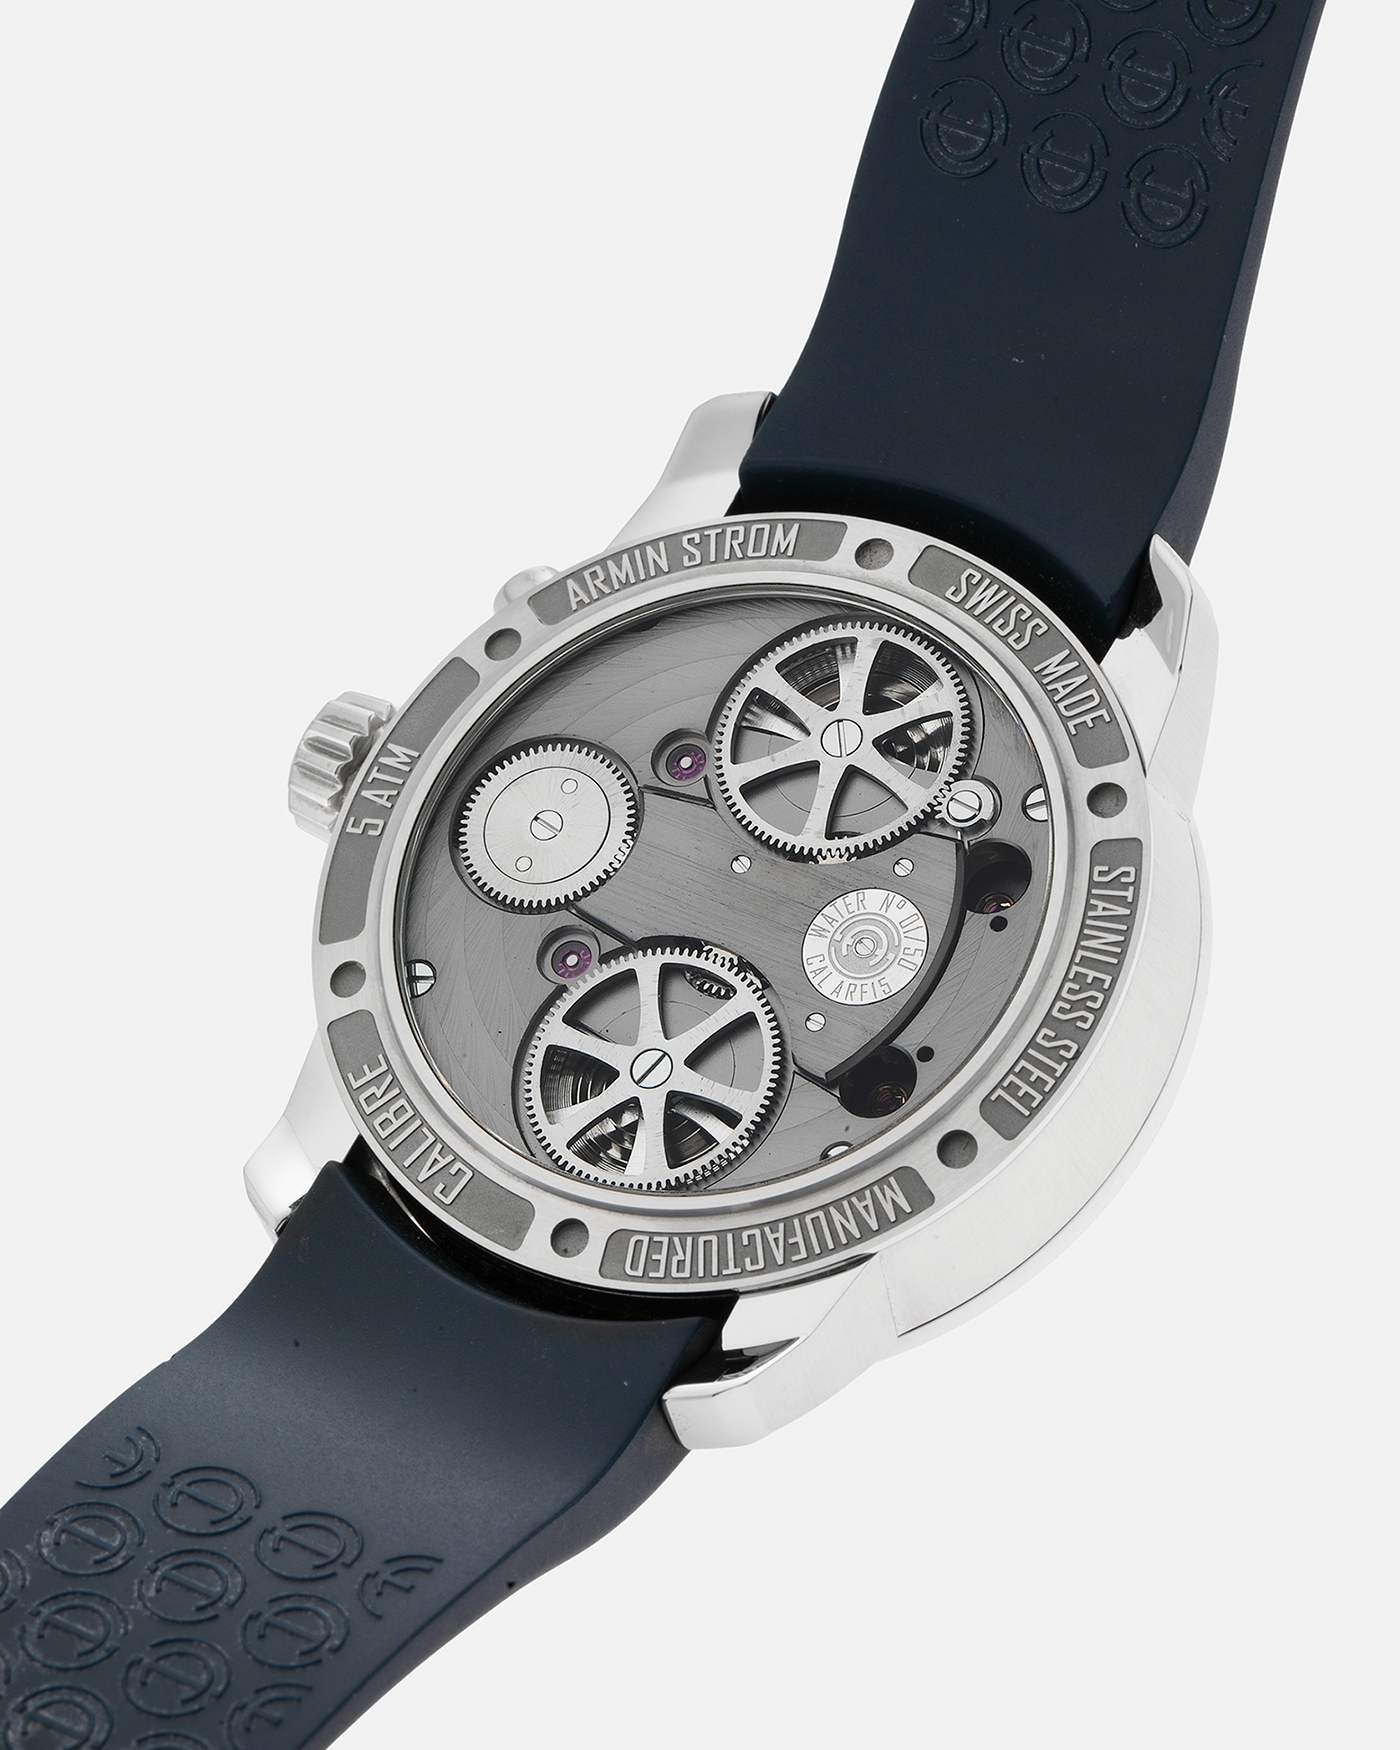 Brand: Armin Strom Year: 2017 Model: Mirrored Force Resonance ‘Water’, Limited Edition of 50 pieces Material: Stainless Steel Movement: Armin Strom Resonance Cal. ARF15, Manual-Winding Case Dimensions: 43.4mm x 13mm Lug Width: 22mm Strap: Armin Strom Dark Navy Rubber Strap with Signed Stainless Steel Tang Buckle